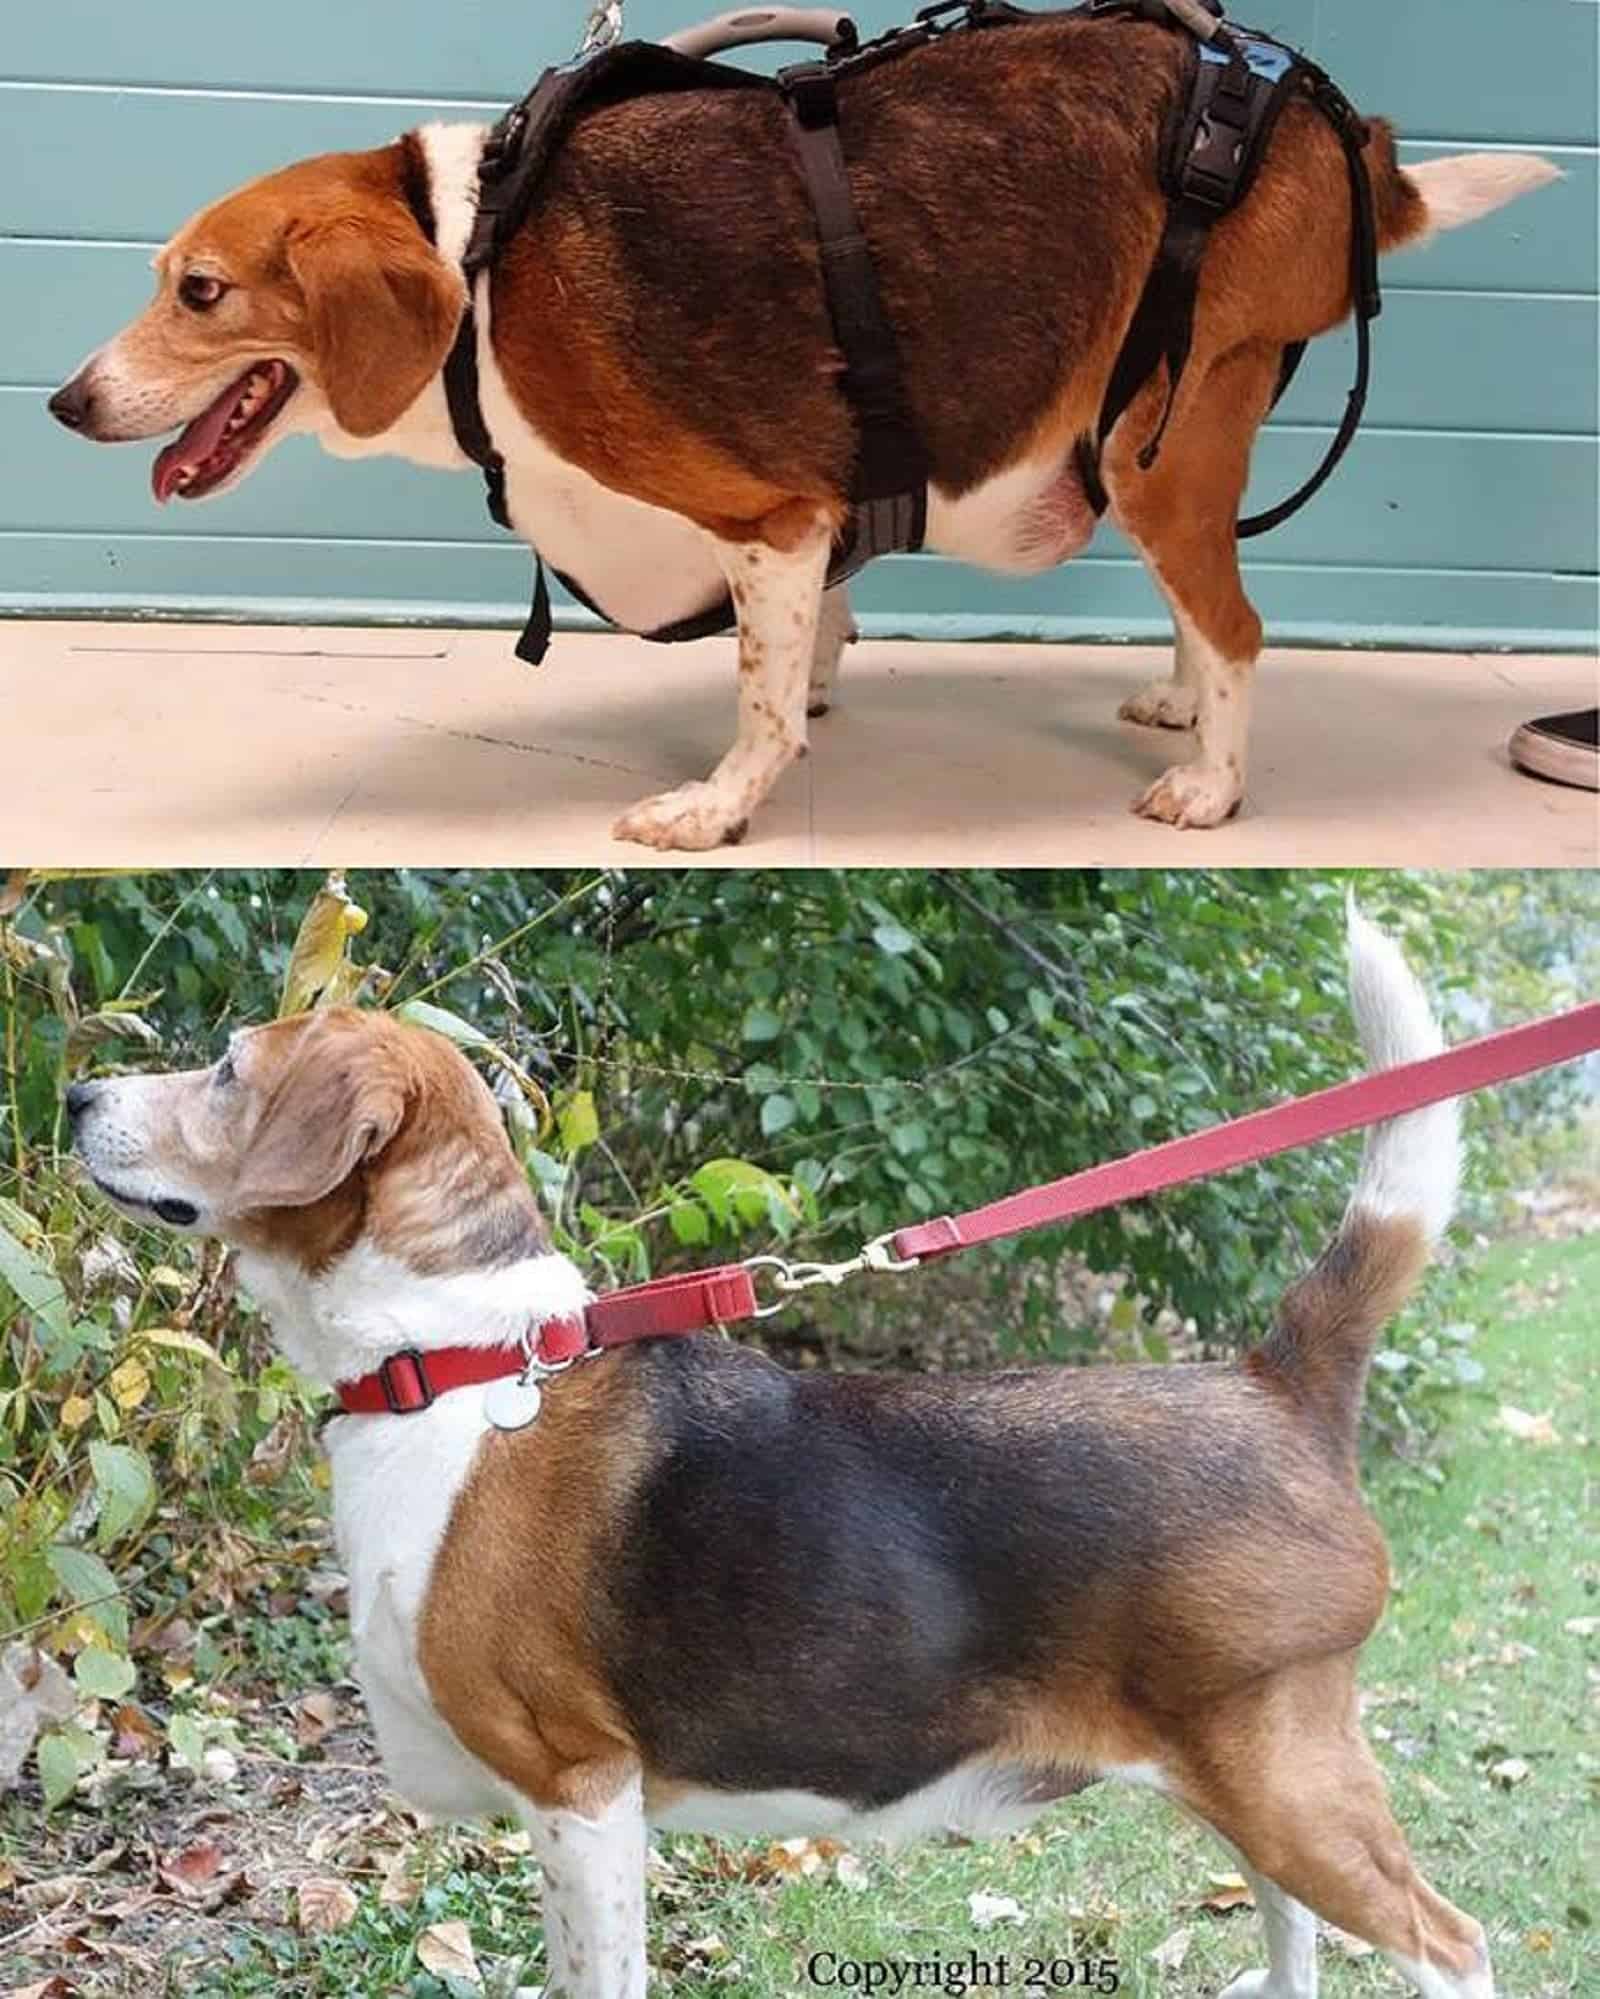 kale chips dog before and after weight loss